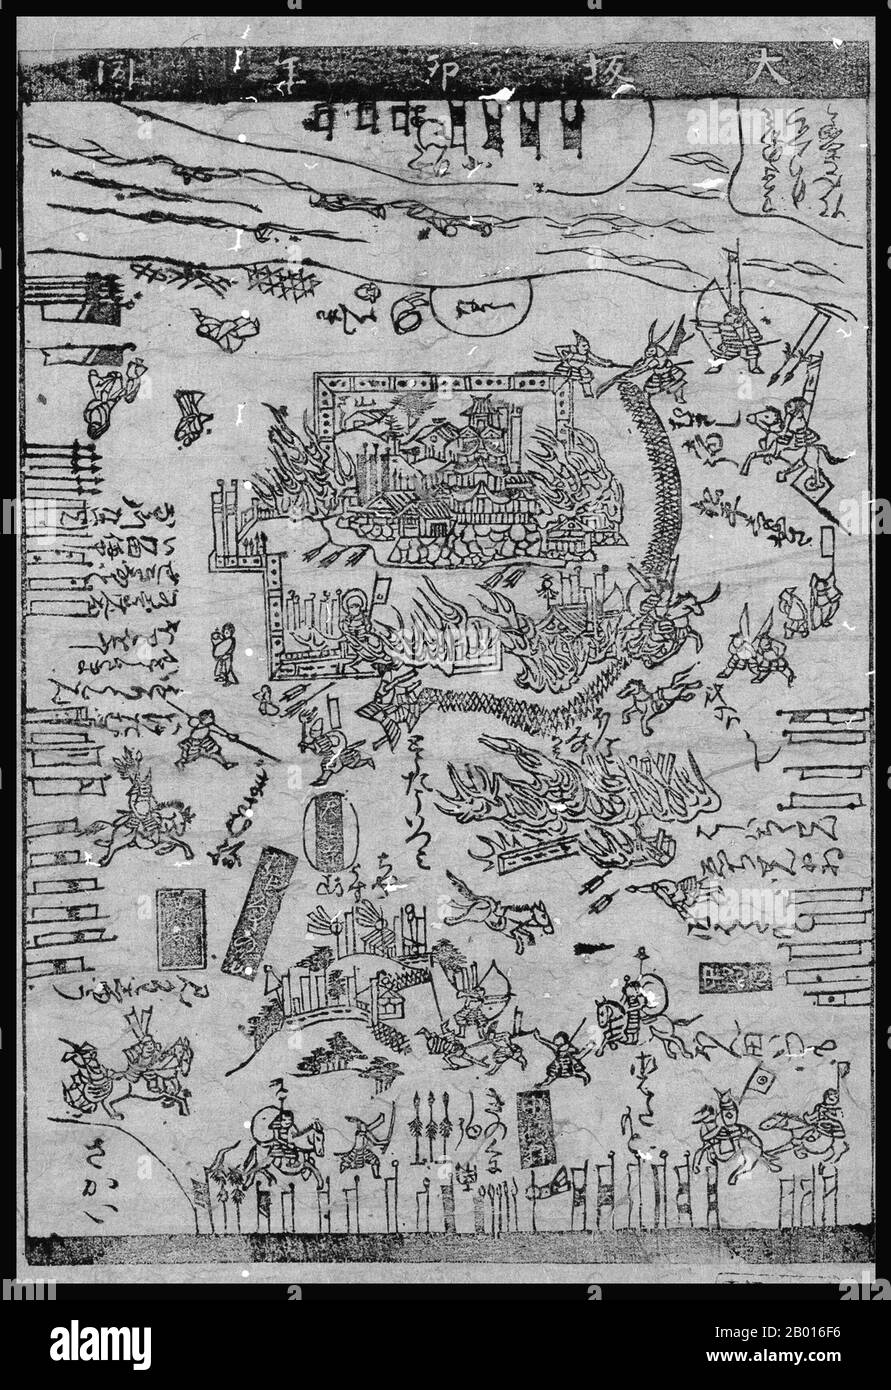 Japan: The siege of Osaka Castle (1615). A commercial newssheet of the Edo period reporting the fall of Osaka Castle, early 17th century.  The Siege of Osaka was a series of battles undertaken by the Tokugawa shogunate against the Toyotomi clan, ending in that clan's destruction. Divided into two stages (Winter Campaign and Summer Campaign), and lasting from 1614 to 1615, the siege put an end to the last major armed opposition to the shogunate's establishment. The end of the conflict is sometimes called the Genna Armistice (Genna Enbu), because the era name was changed from Keichō to Genna. Stock Photo